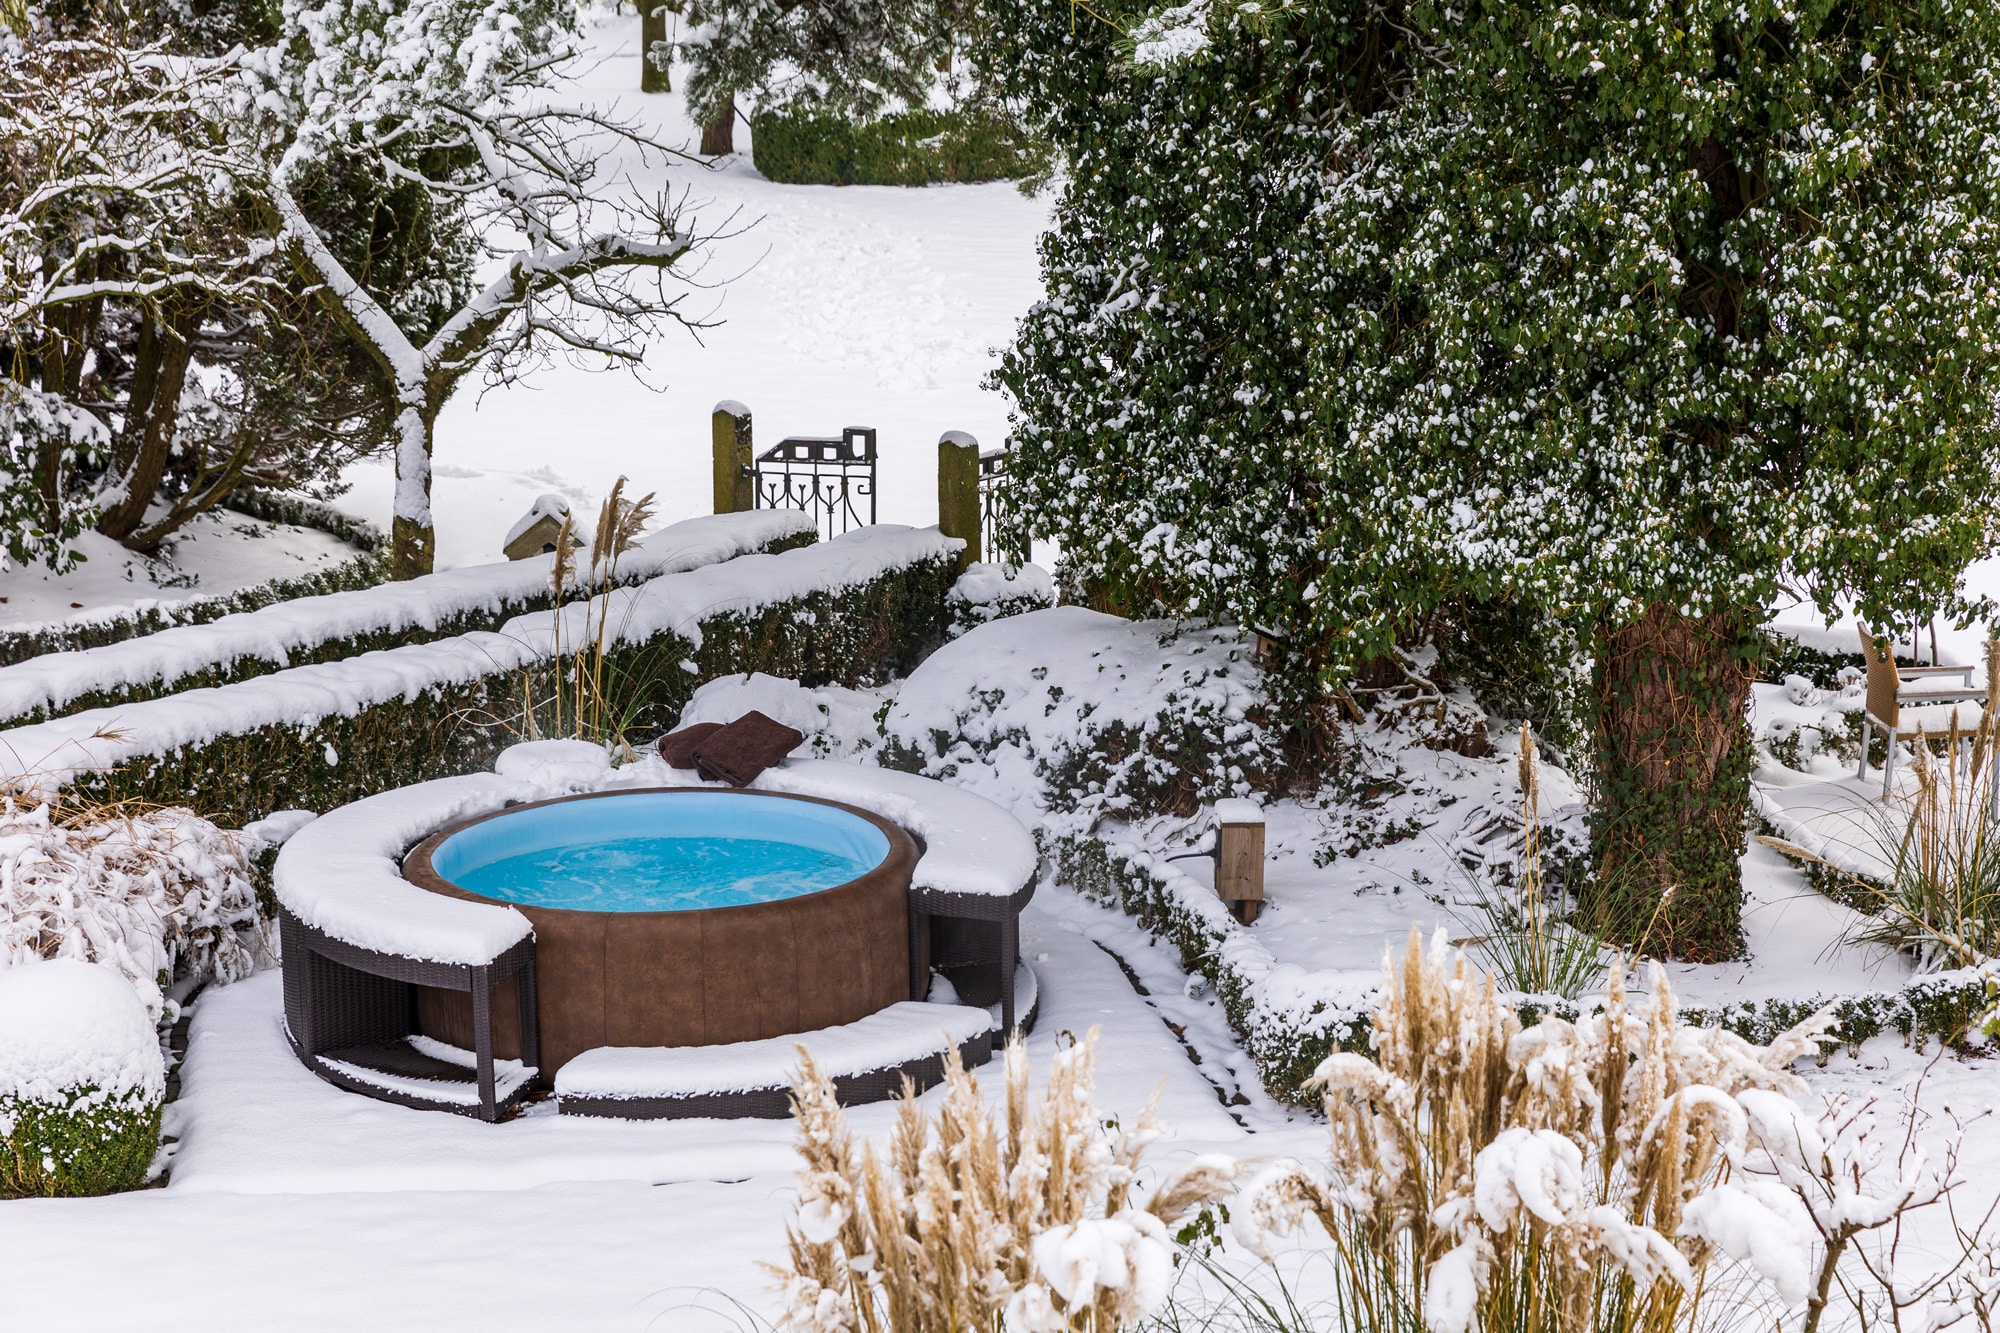 Use your Softub Spa in the winter